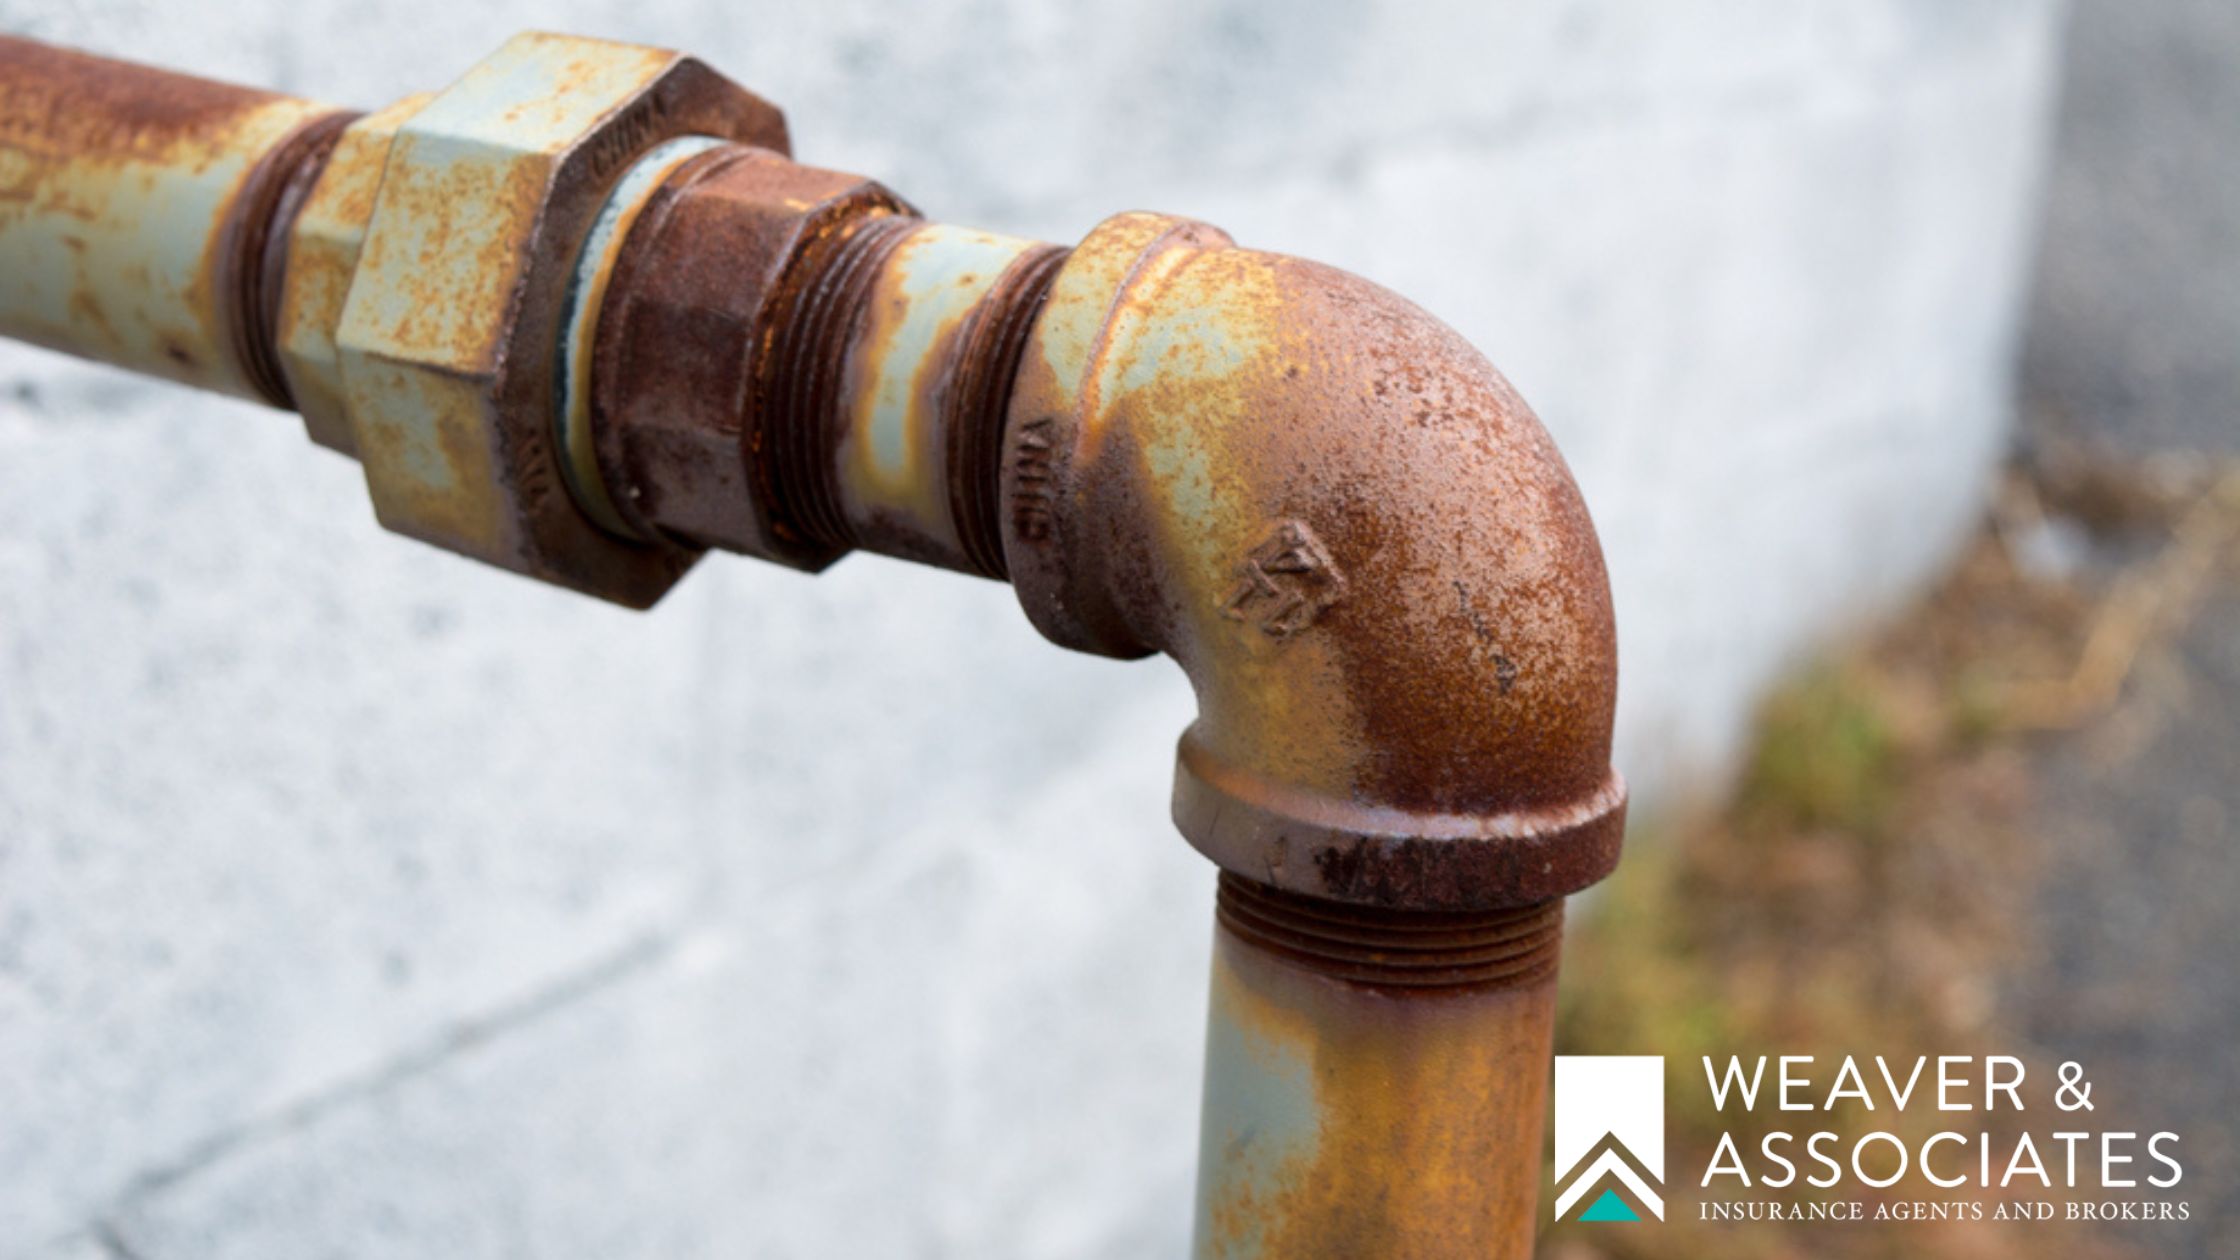 Homeowners Insurance: Does It Cover Galvanized Pipes?